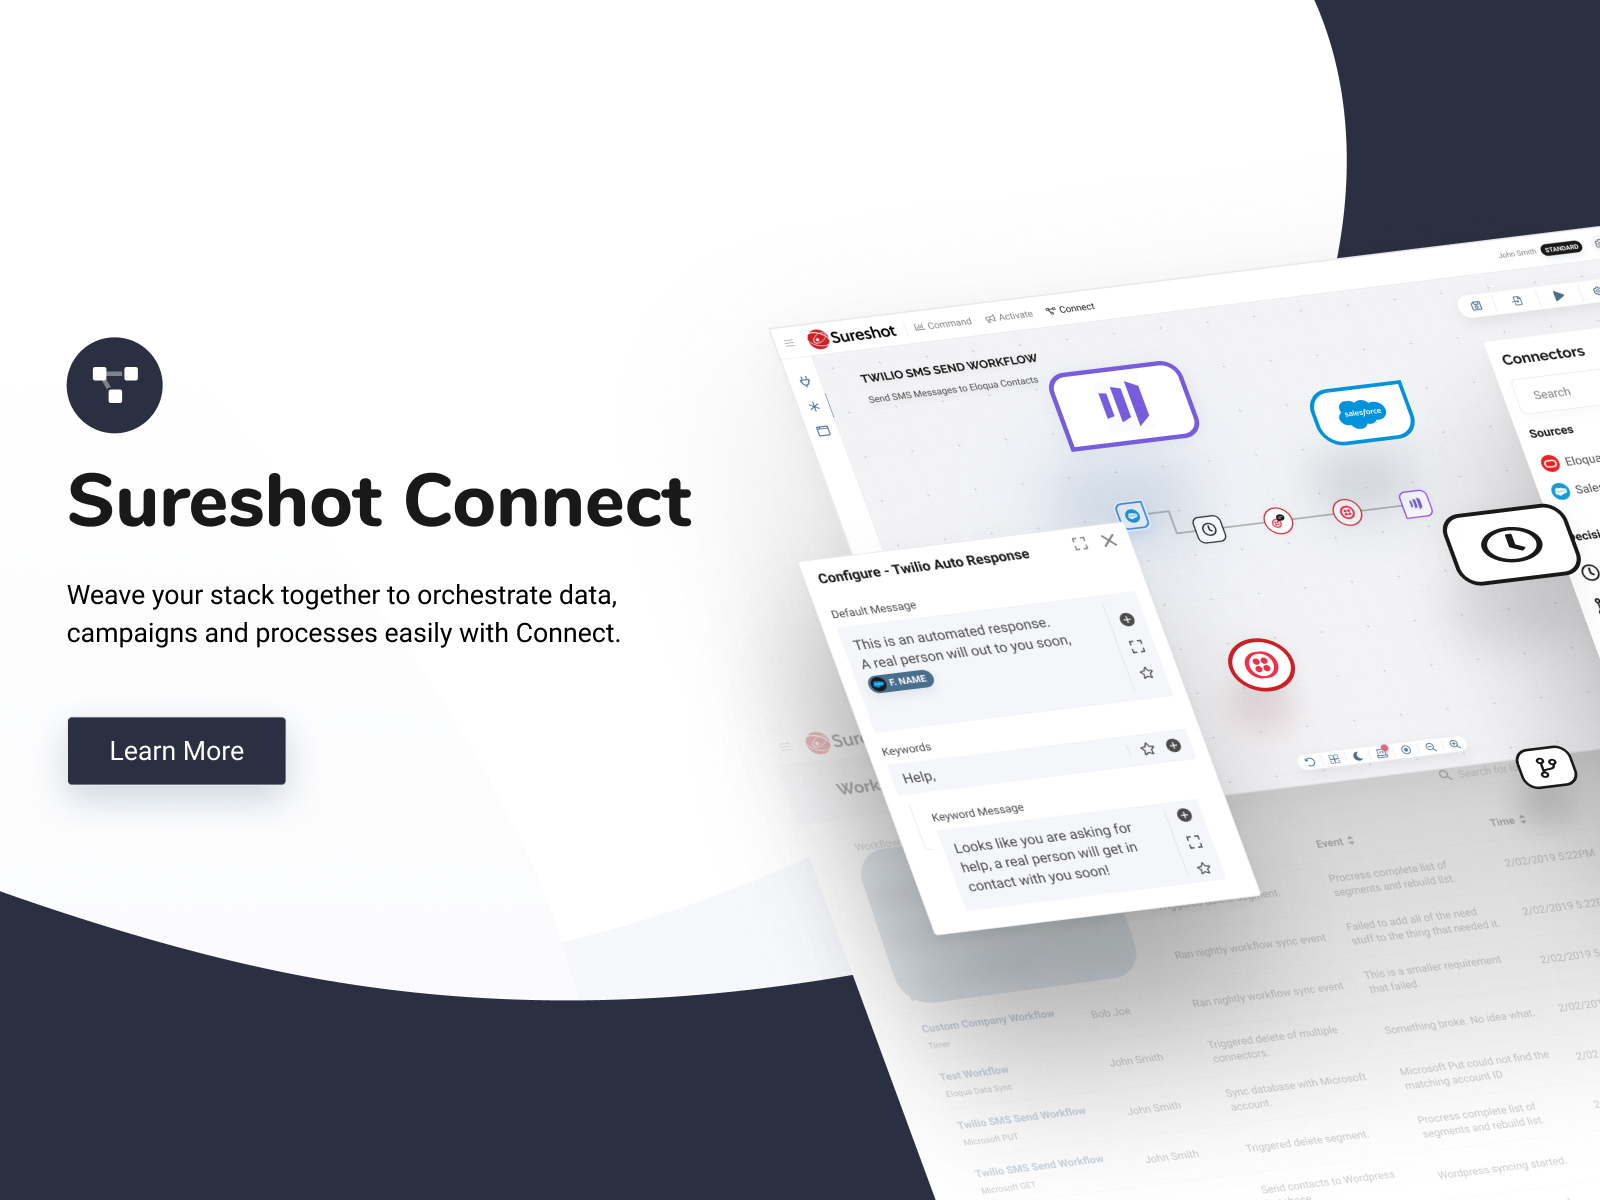 Shown is the marketing website with highlights of the Connect app